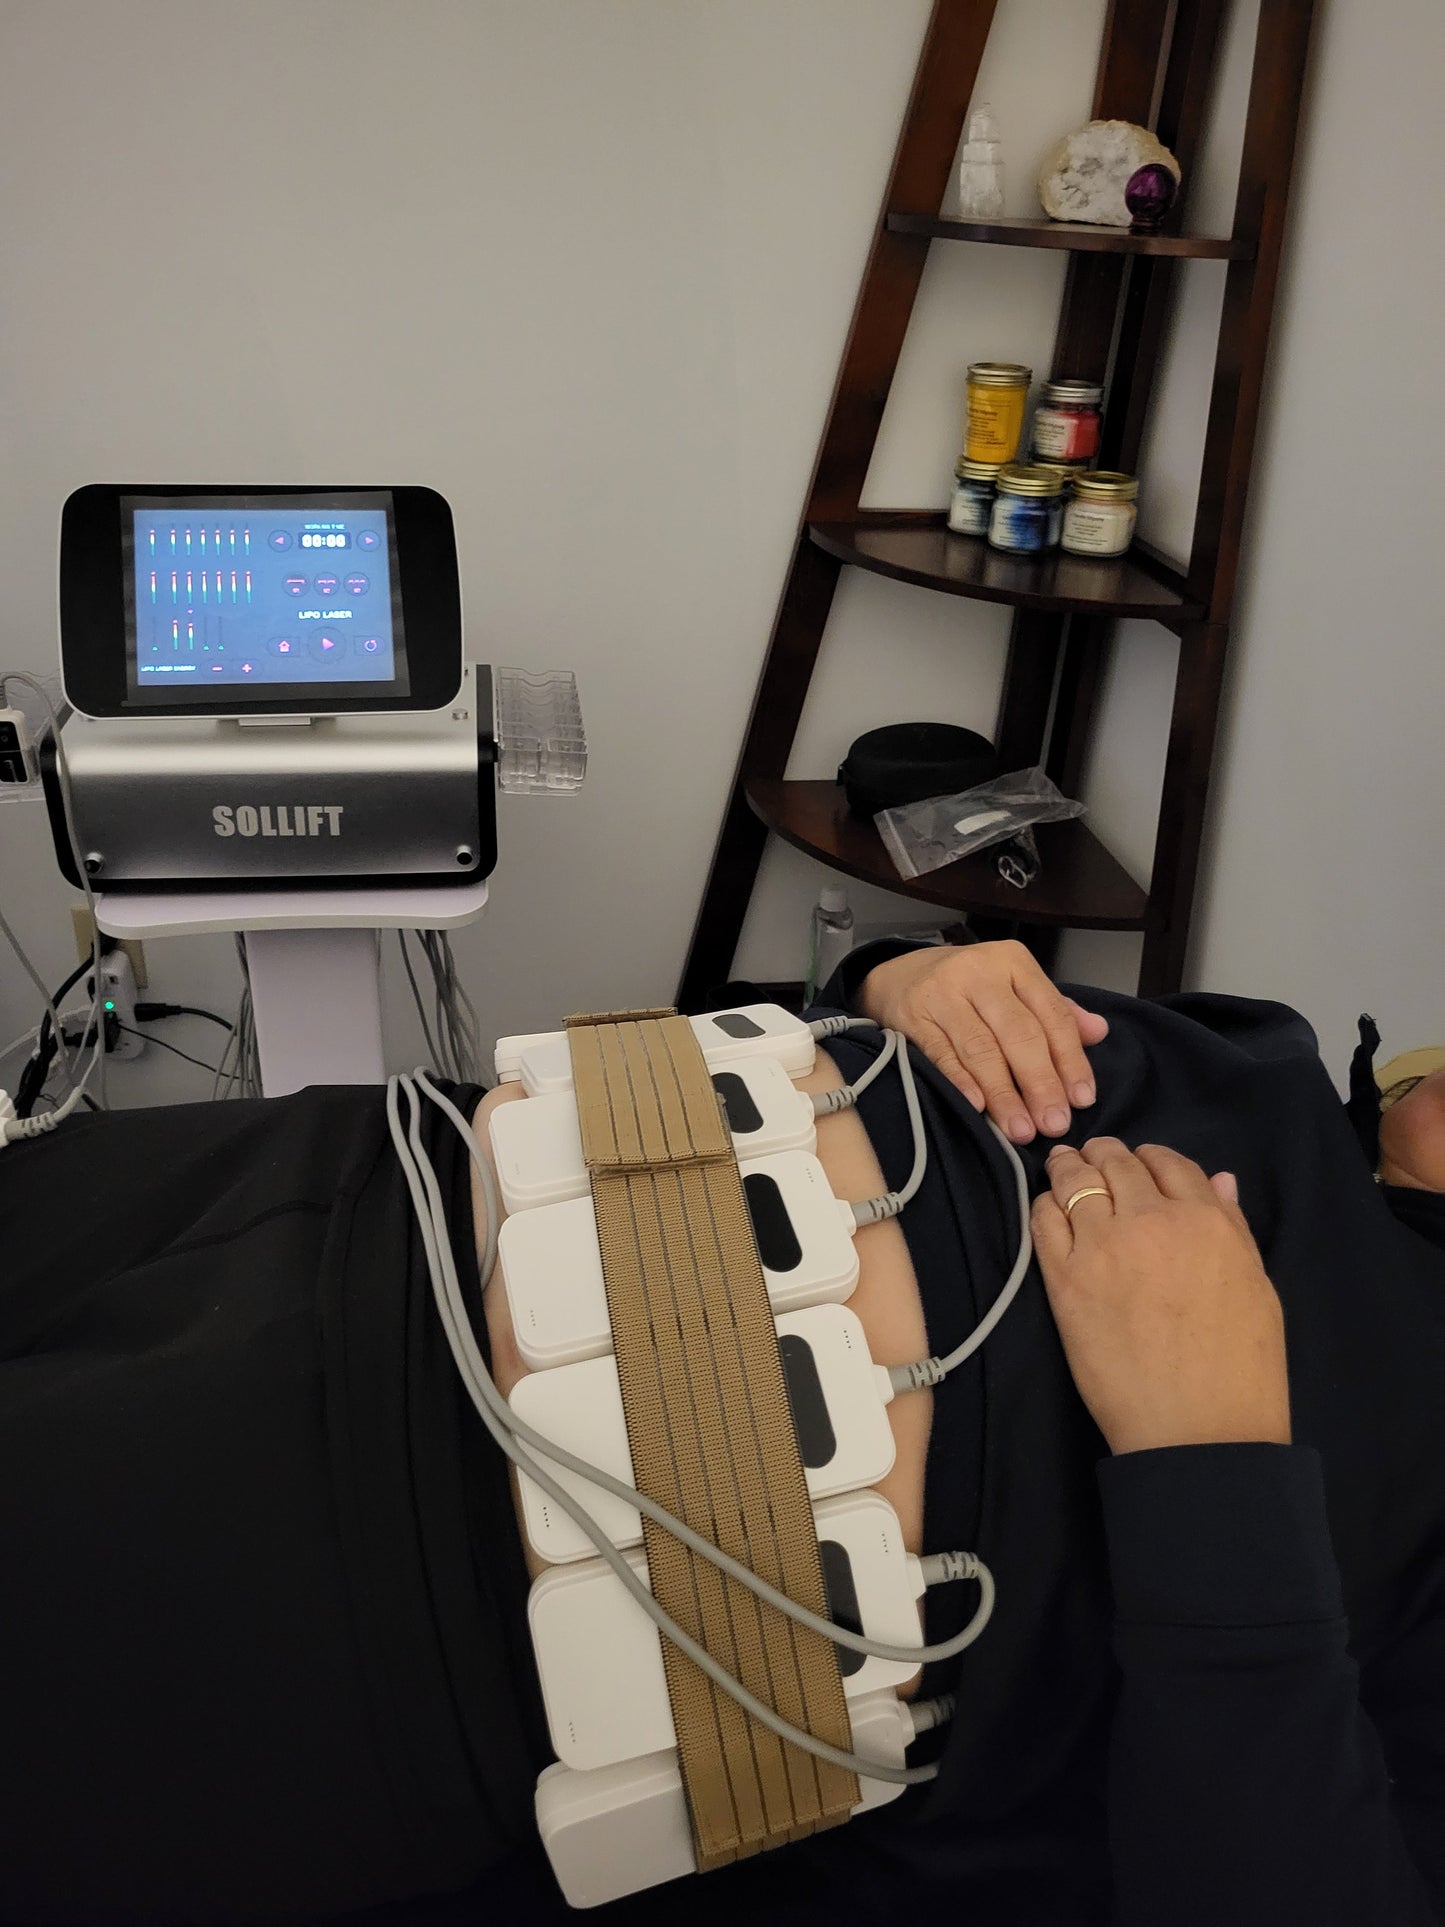 Body Contouring and Sculpting Lipo Laser - THREE Sessions